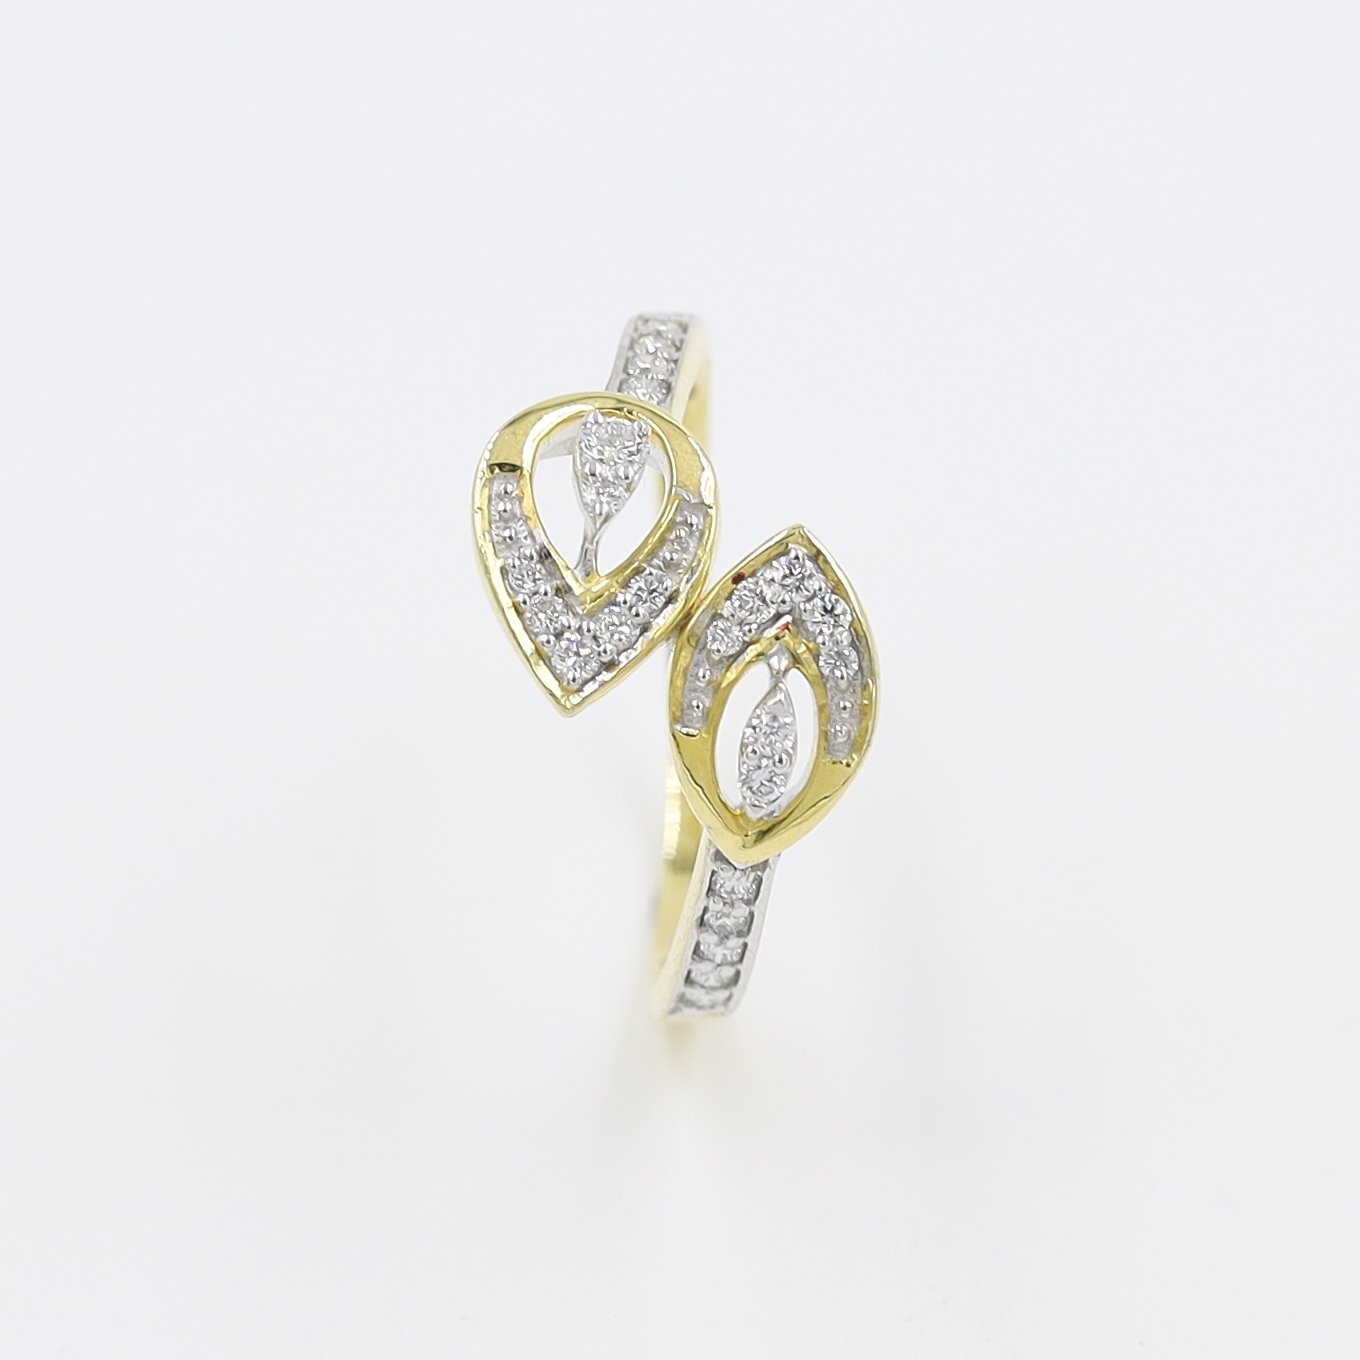 Flawless Leaves Style 14 Karat Gold And Diamond Ring